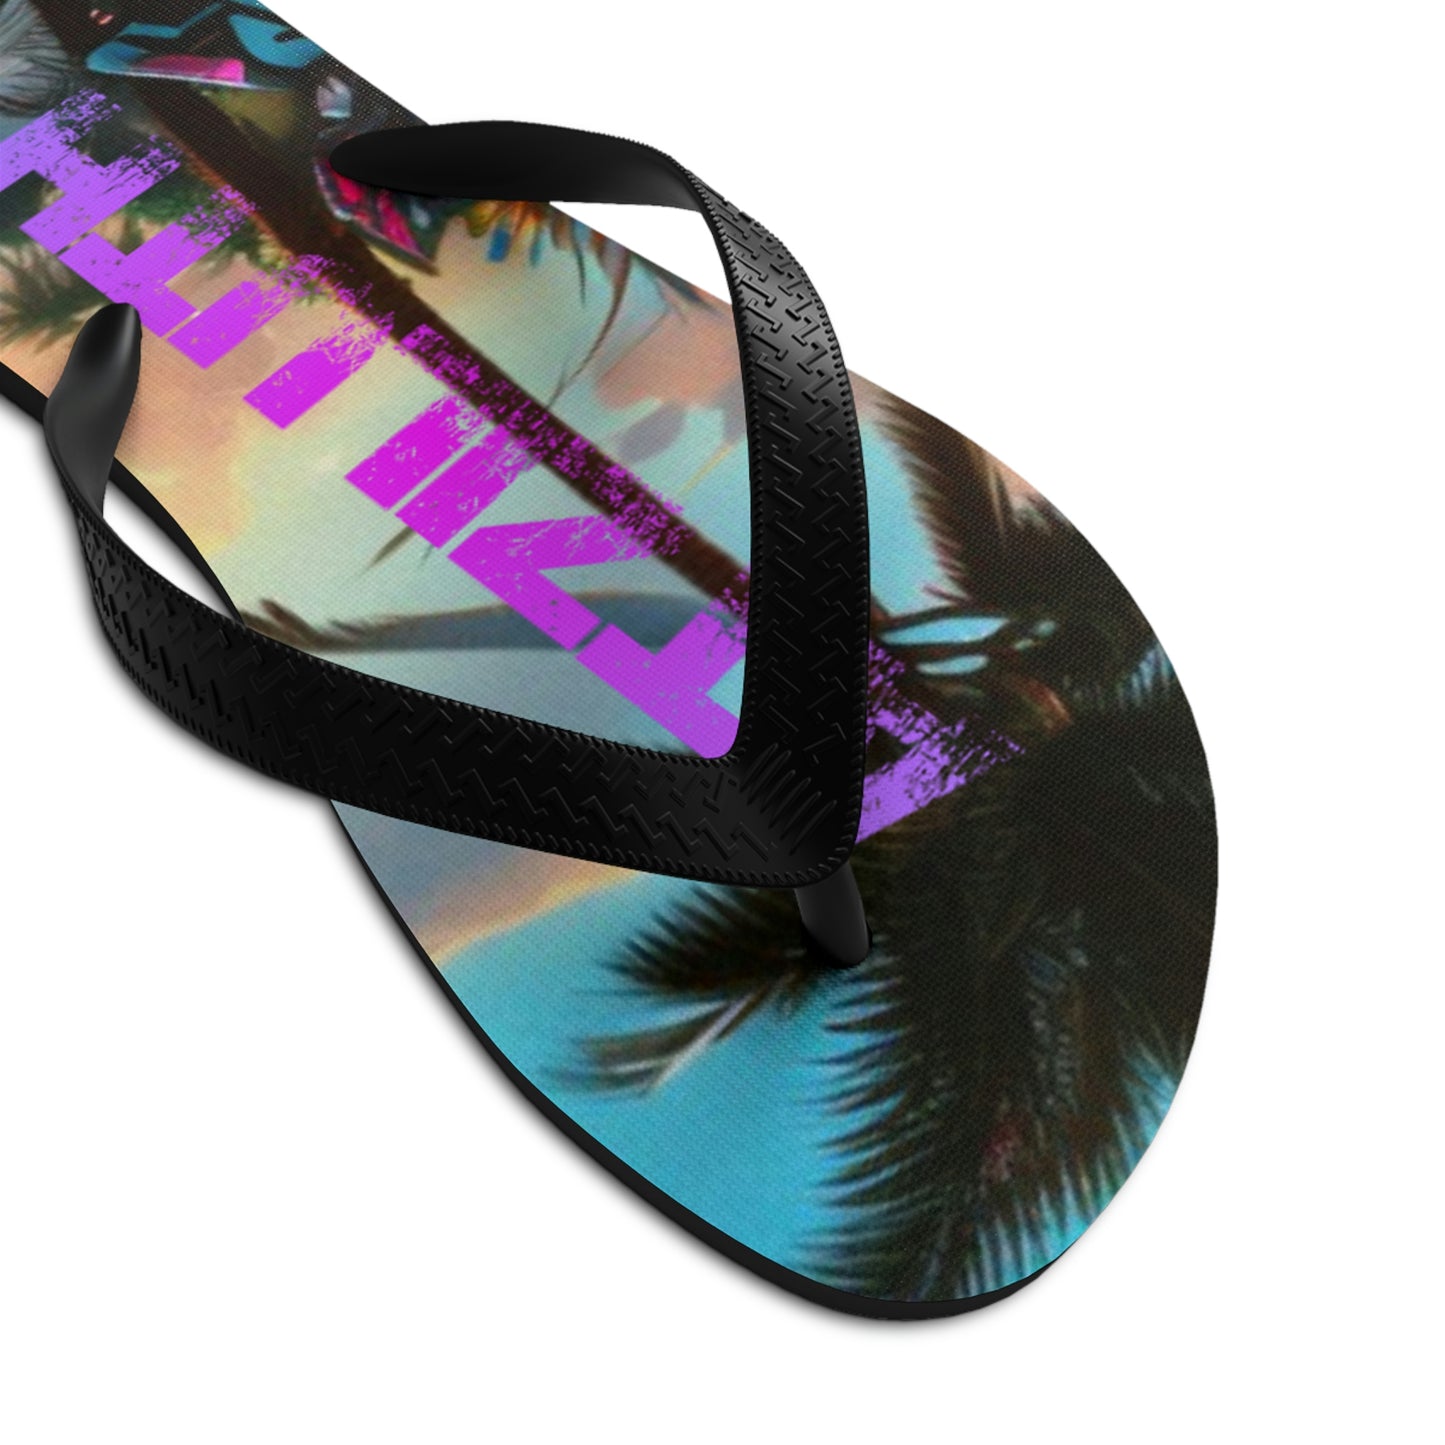 Atziluth Gallery " Island Vibes " Hip Flops